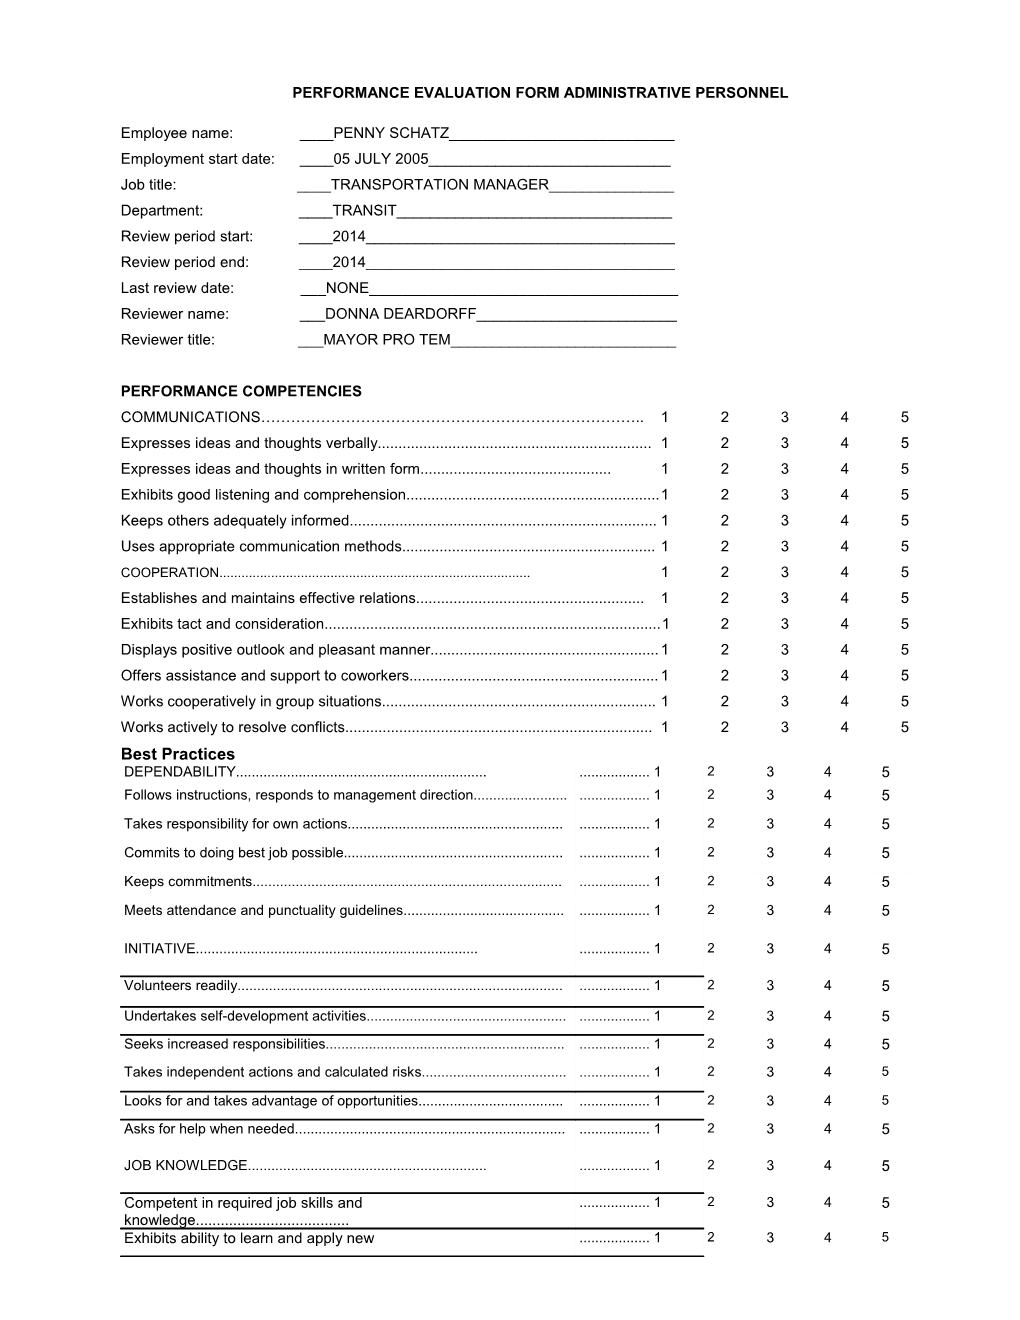 Performance Evaluation Form Administrative Personnel